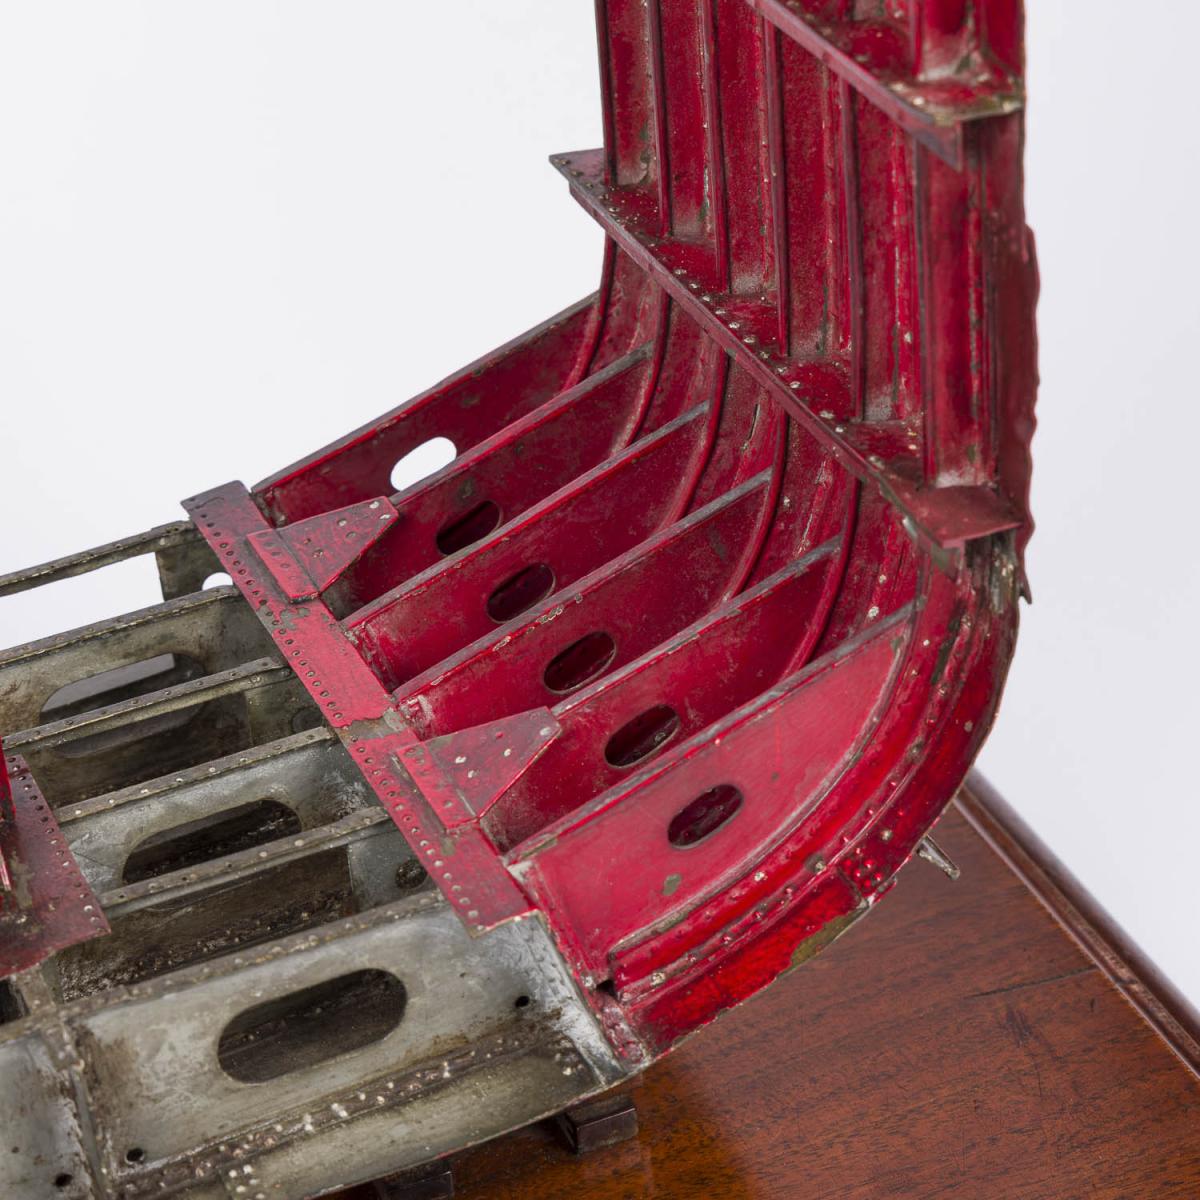 Shipbuilder's model of half a midship section of a steel steamer